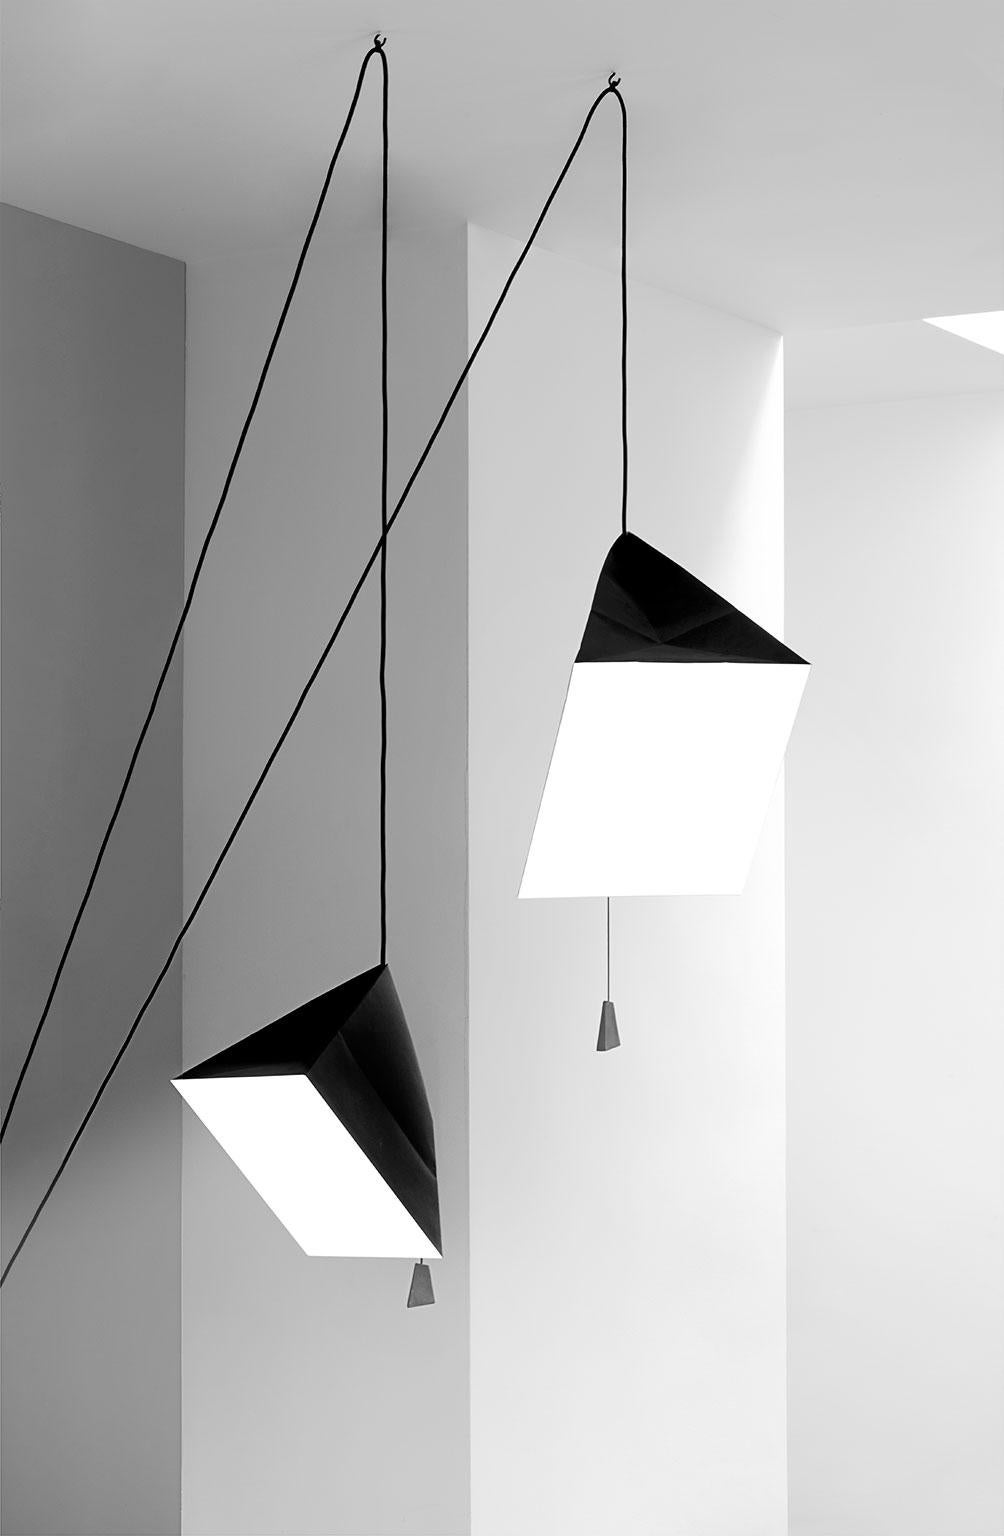 Pairing a strong shape with a fragile material, Poise is a clean, modern origami.
The pendant comes with a 6m (19,7’) long cable freeing up creative possibilites for installation. The graphic lines of the cable going up and down in the space